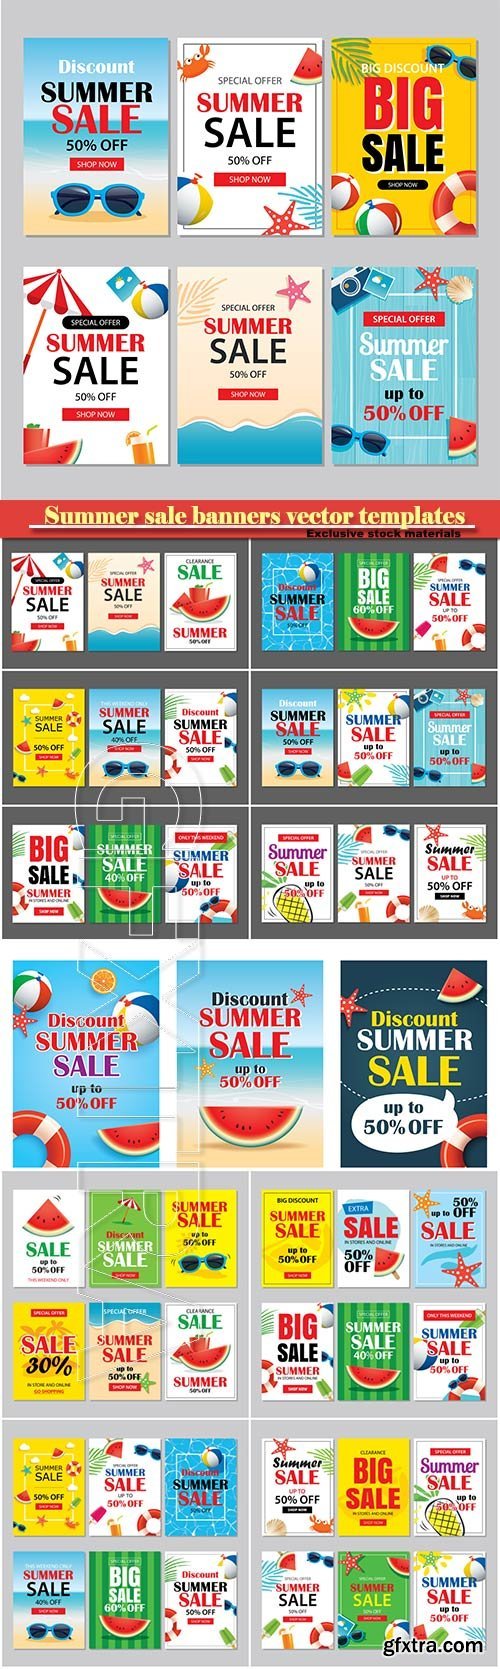 Summer sale banners mobile vector templates